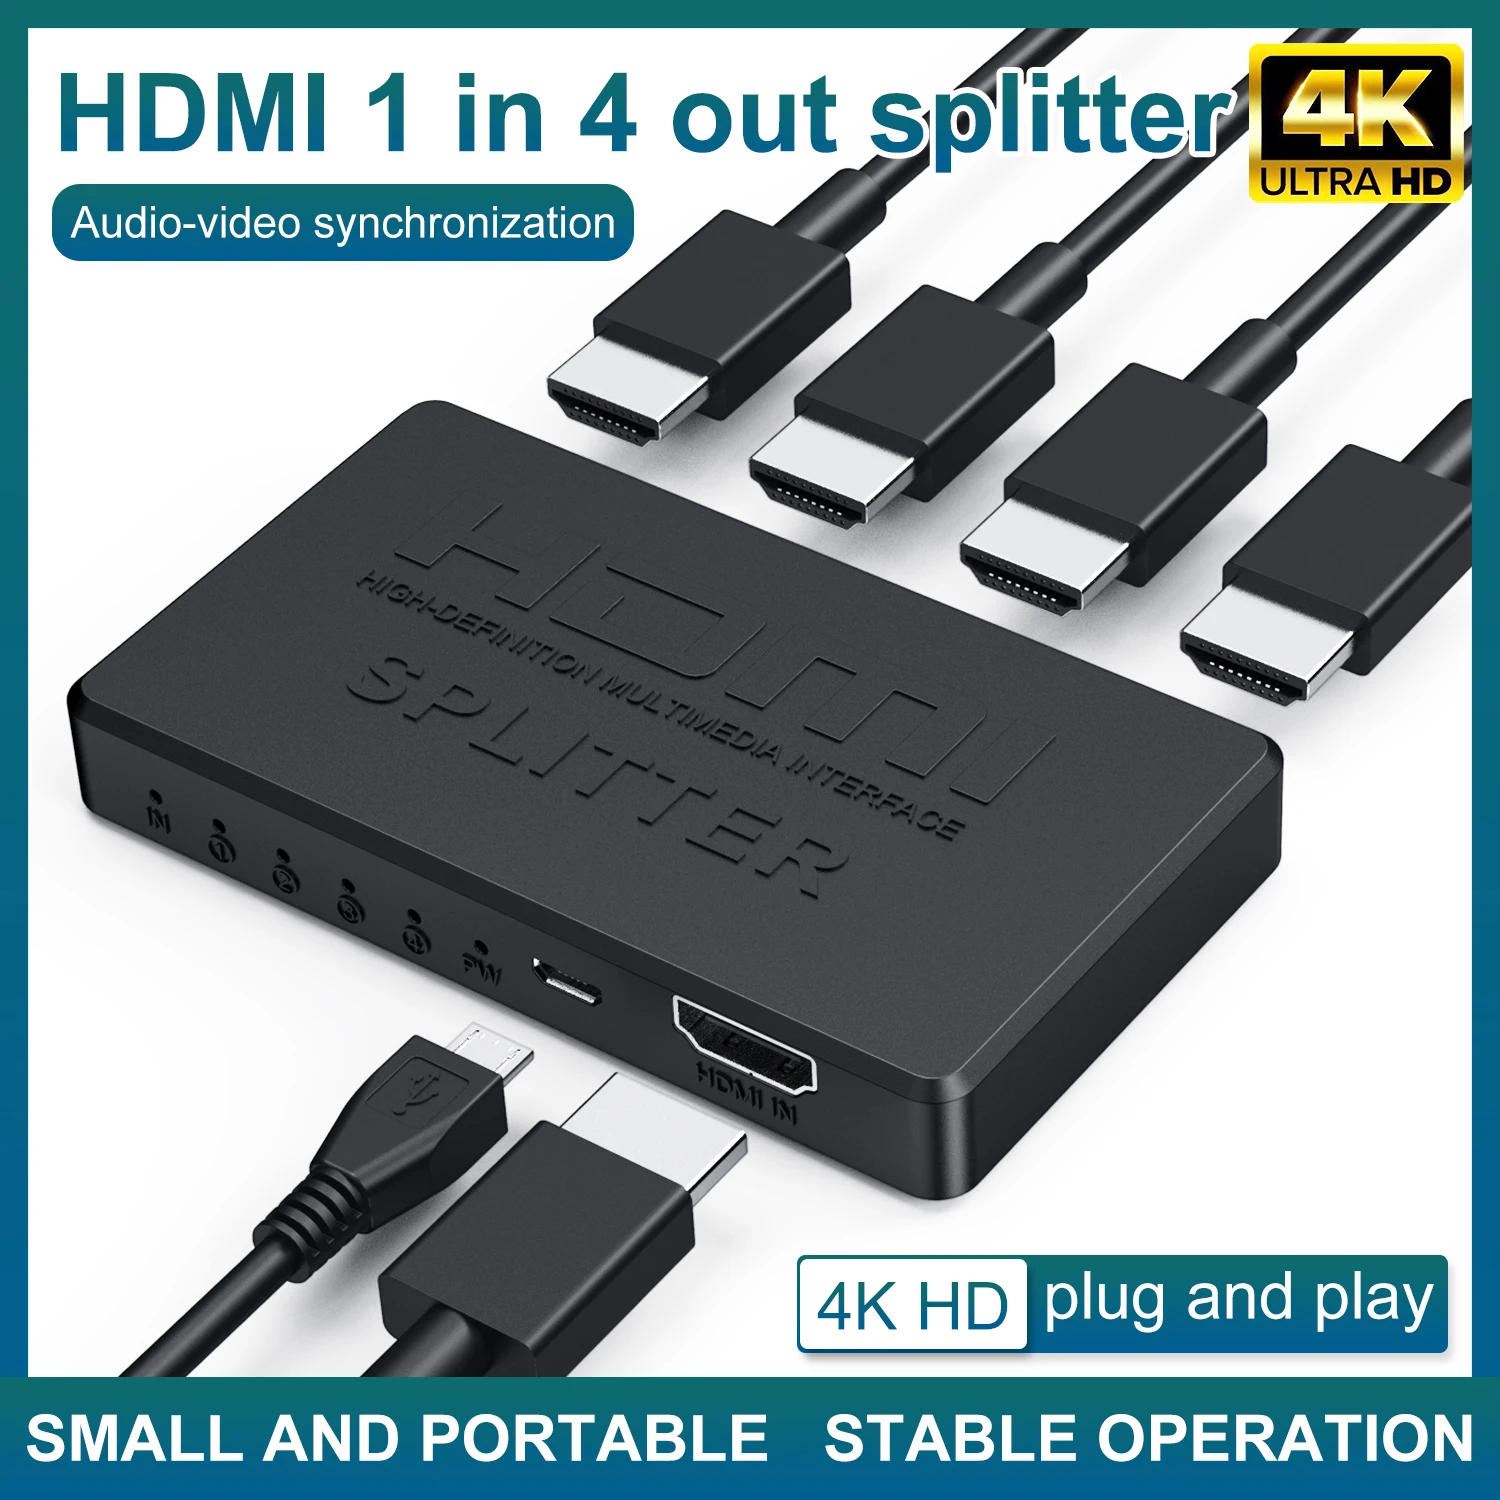 1x2/1x4 4K 3D HDMI-compatible Female Splitter 1 In 4 Out Amplifier 1080P Full HD Video Distributor Adapter For HDTV DVD PS4 Xbox